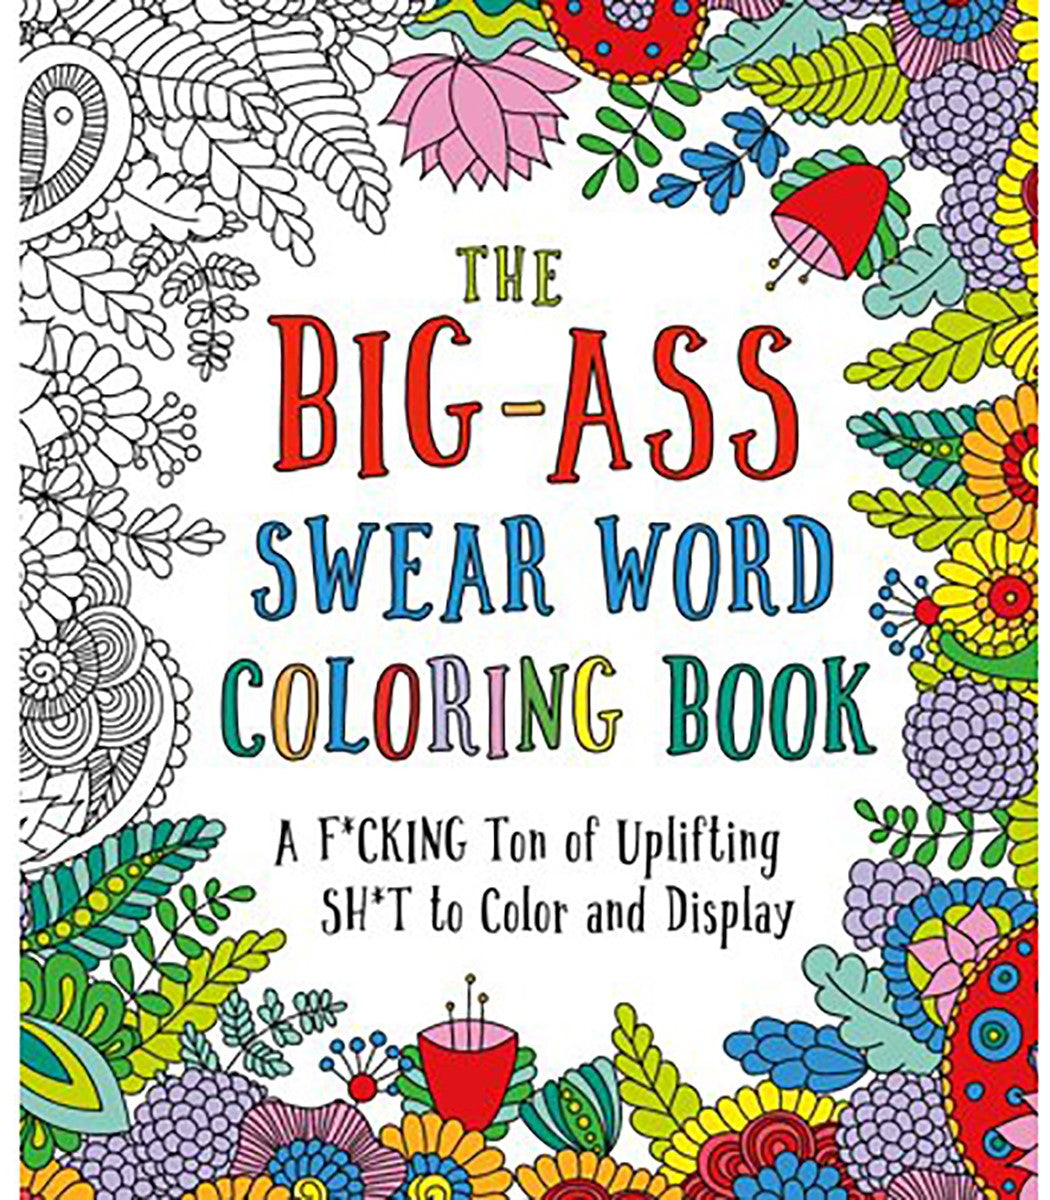 Big Ass Swear Word Coloring Book: A Ton of F*cking Ton of Uplifting Sh*t to Color - St. Martin's Griffin